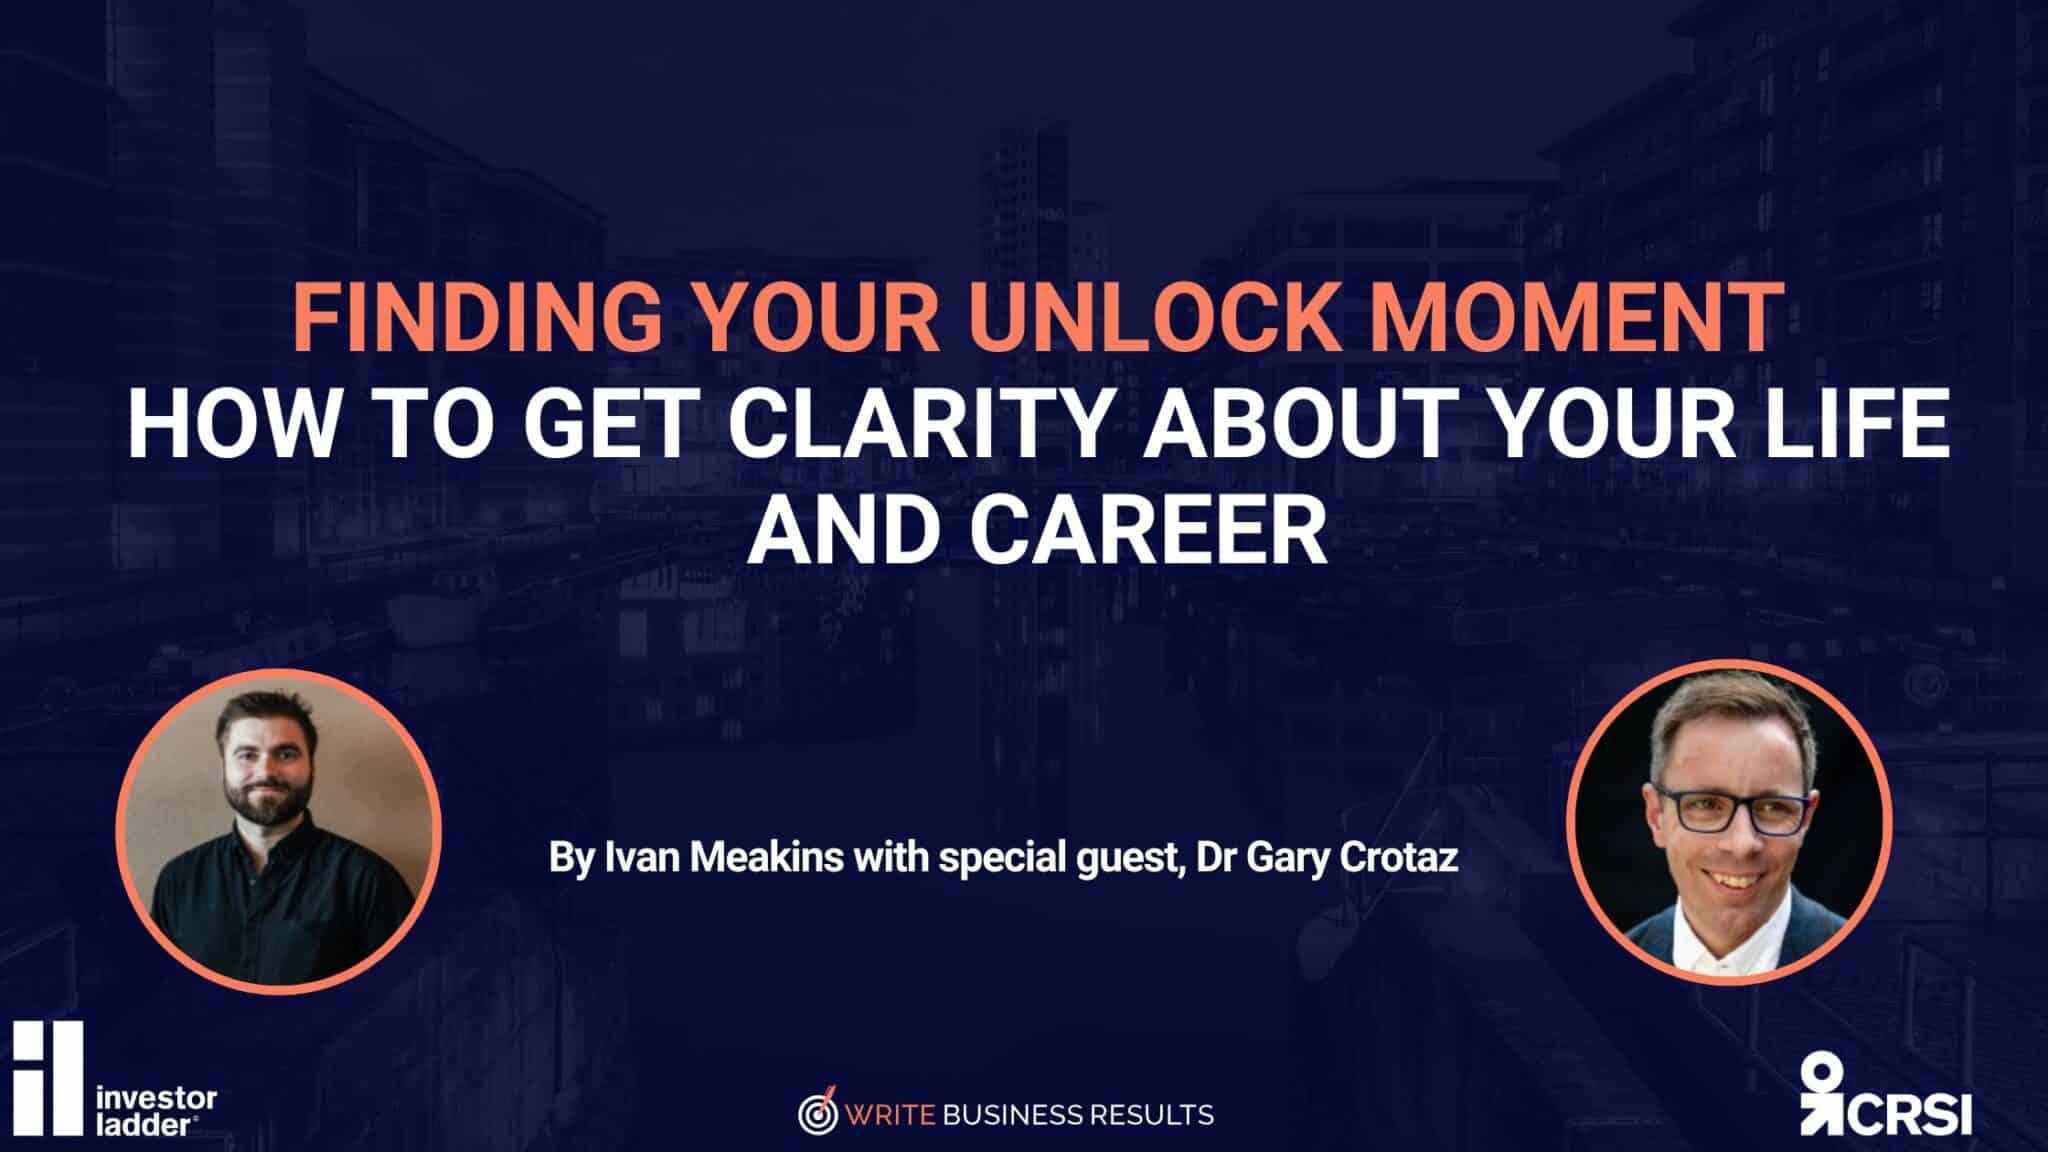 Finding Your Unlock Moment: How To Get Clarity About Your Life And Career